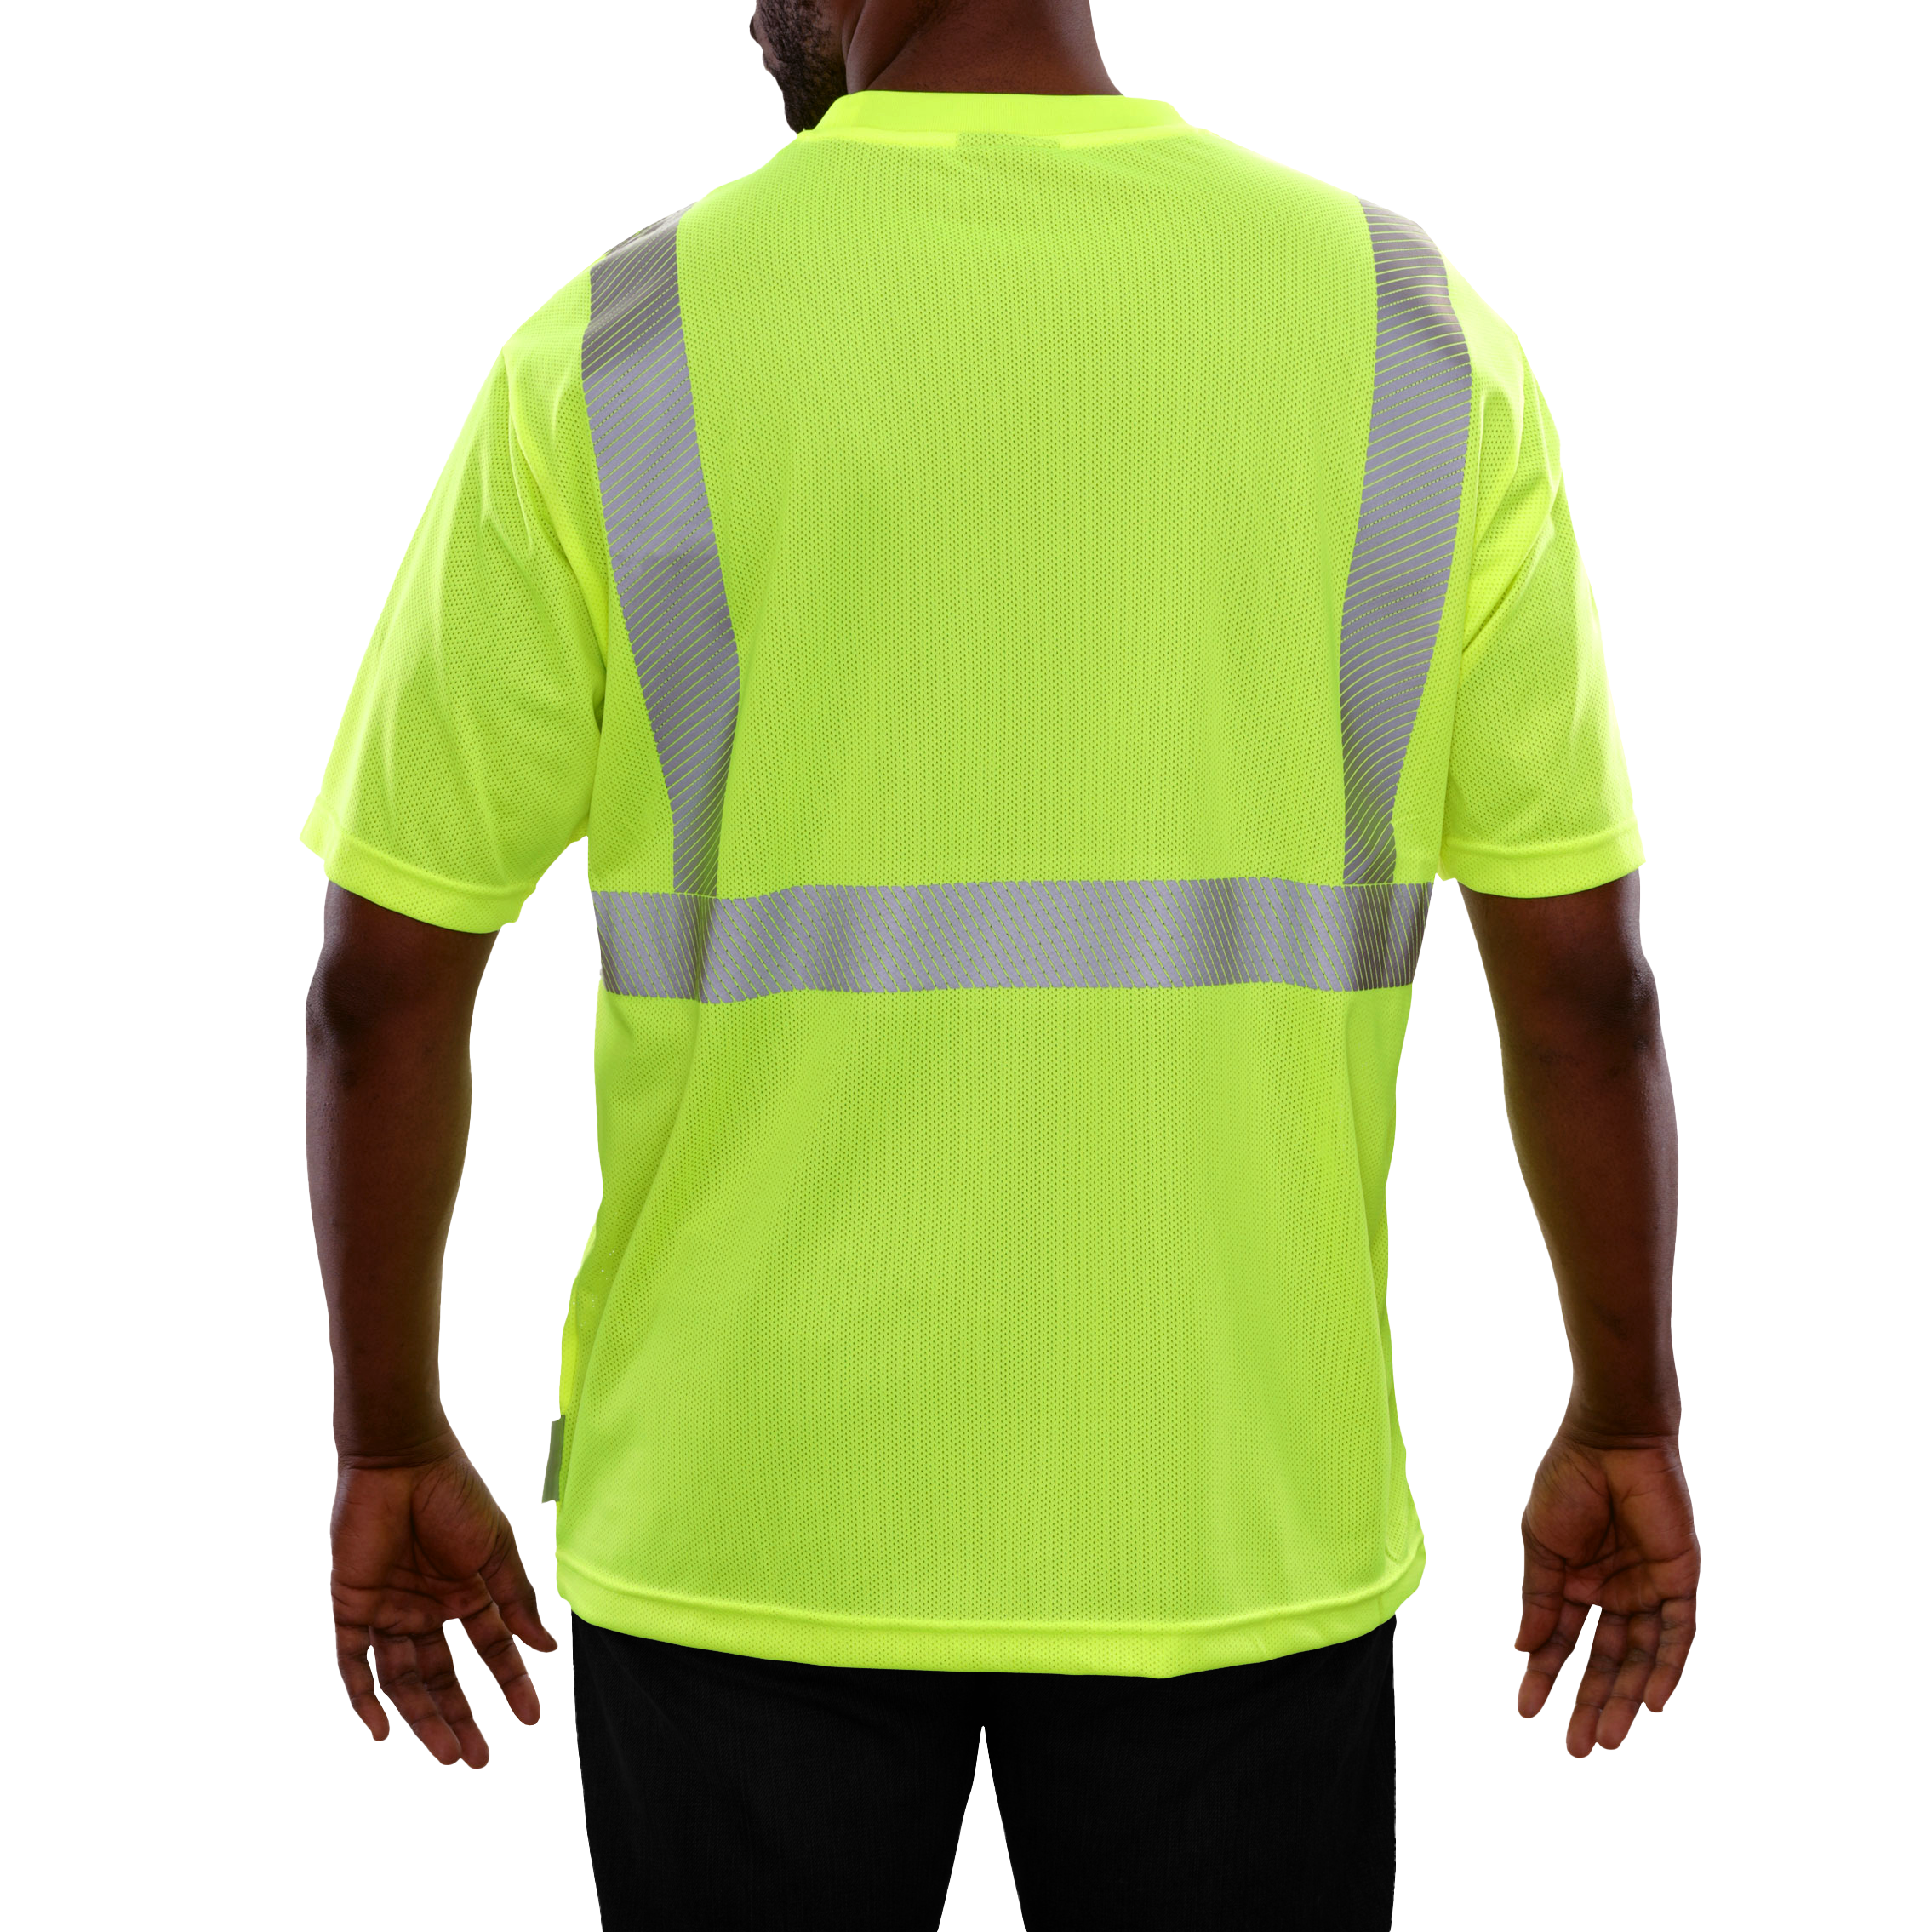 Reflective Apparel High Visibility Pocket Shirt Lime Micromesh Comfort Trim by 3M